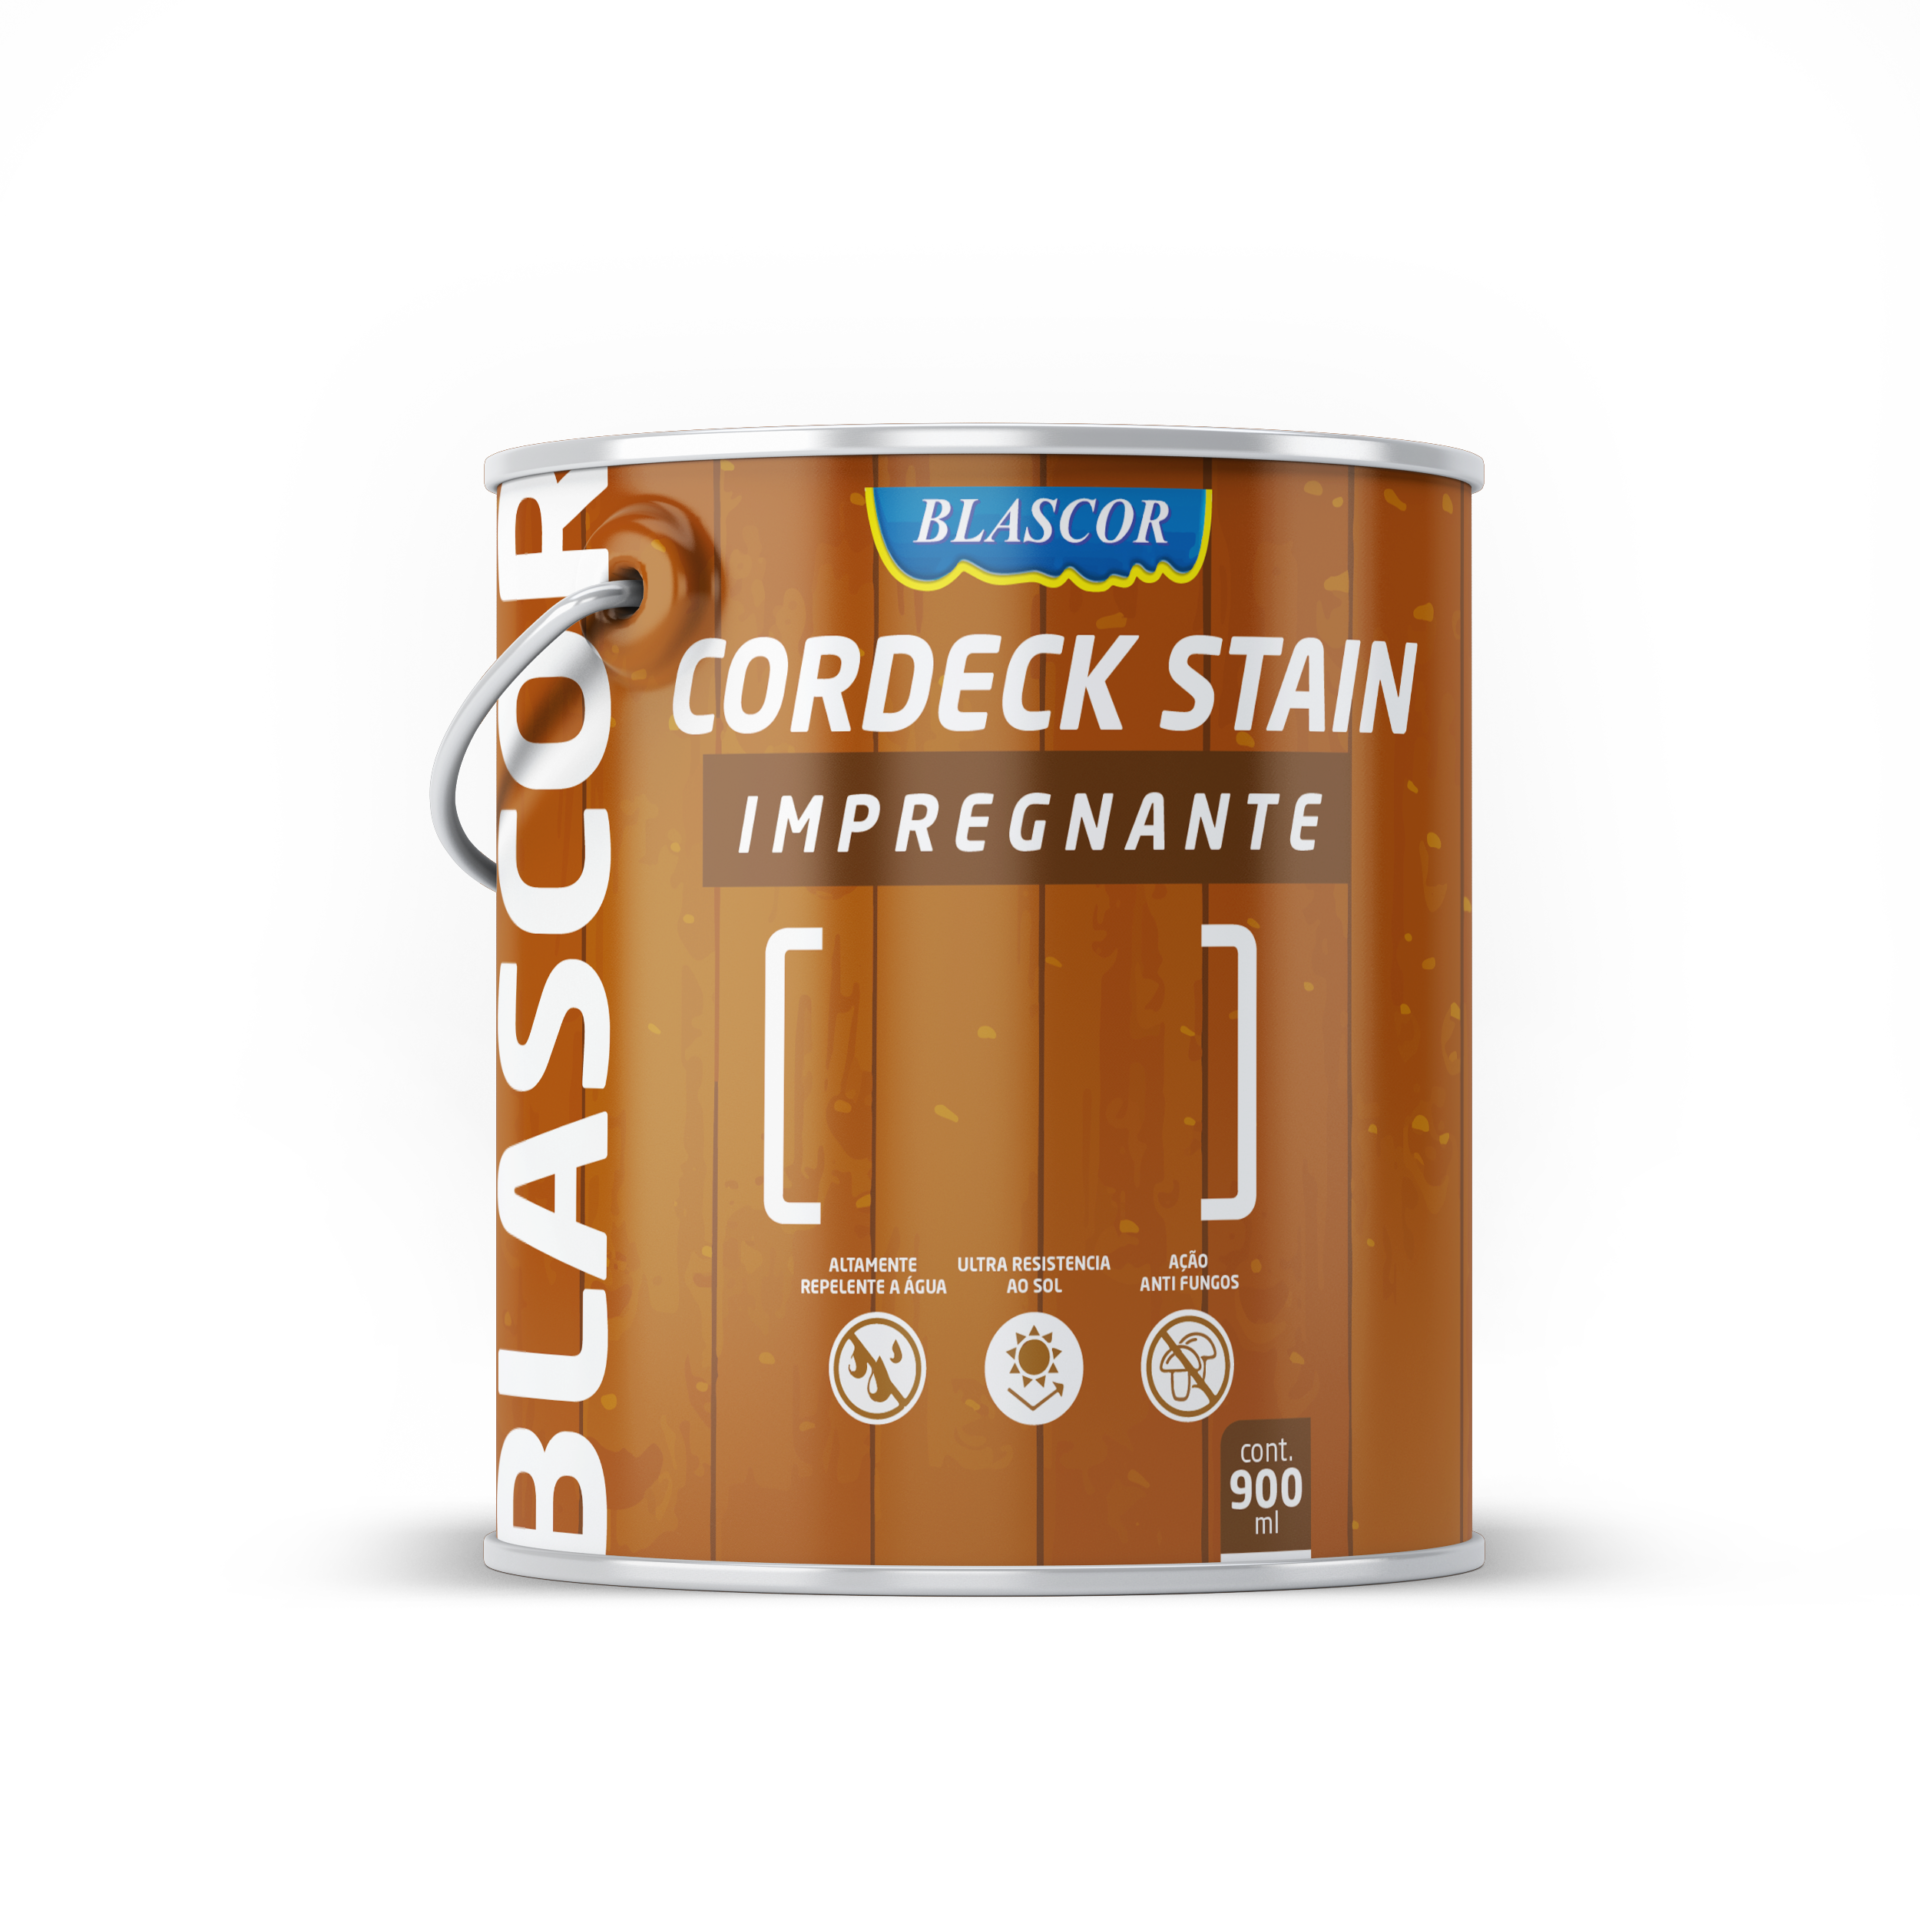 Cordeck Stain